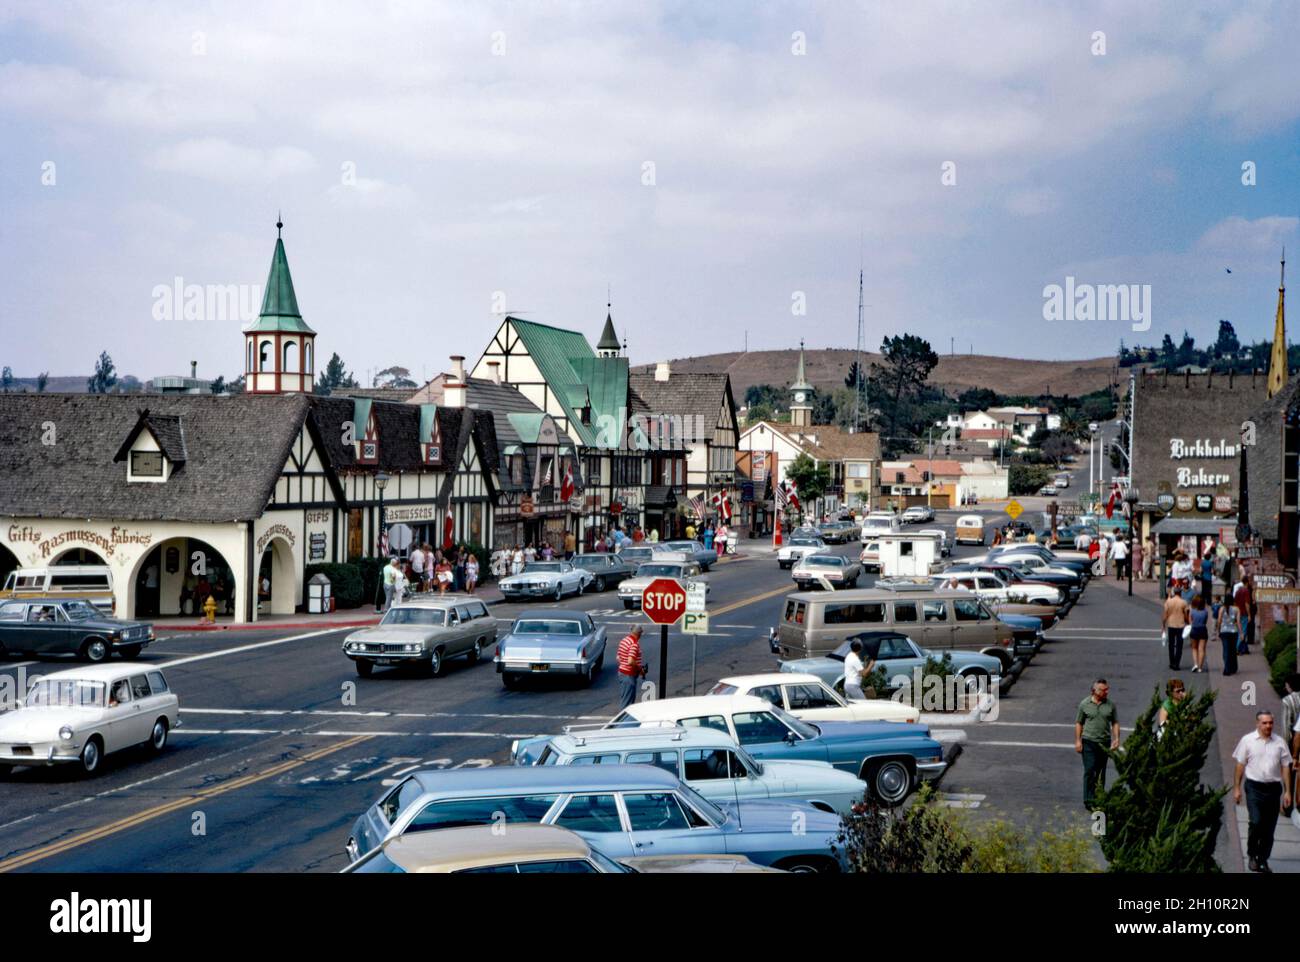 A view down the main street of Solvang in the Santa Ynez Valley, Santa Barbara County, California, USA in 1972. Solvang is often dubbed ‘The Danish Capital of America’ (Solvang is Danish for ‘sunny field’). A small community grew up around the mission of Santa Inés in 1804. In 1911 a new settlement was founded around the mission by a group of Danish-Americans who purchased land to establish a Danish community. It now has distinctive Danish-themed architecture – the town attracts many tourists from the Nordic countries – a vintage 1970s photograph. Stock Photo